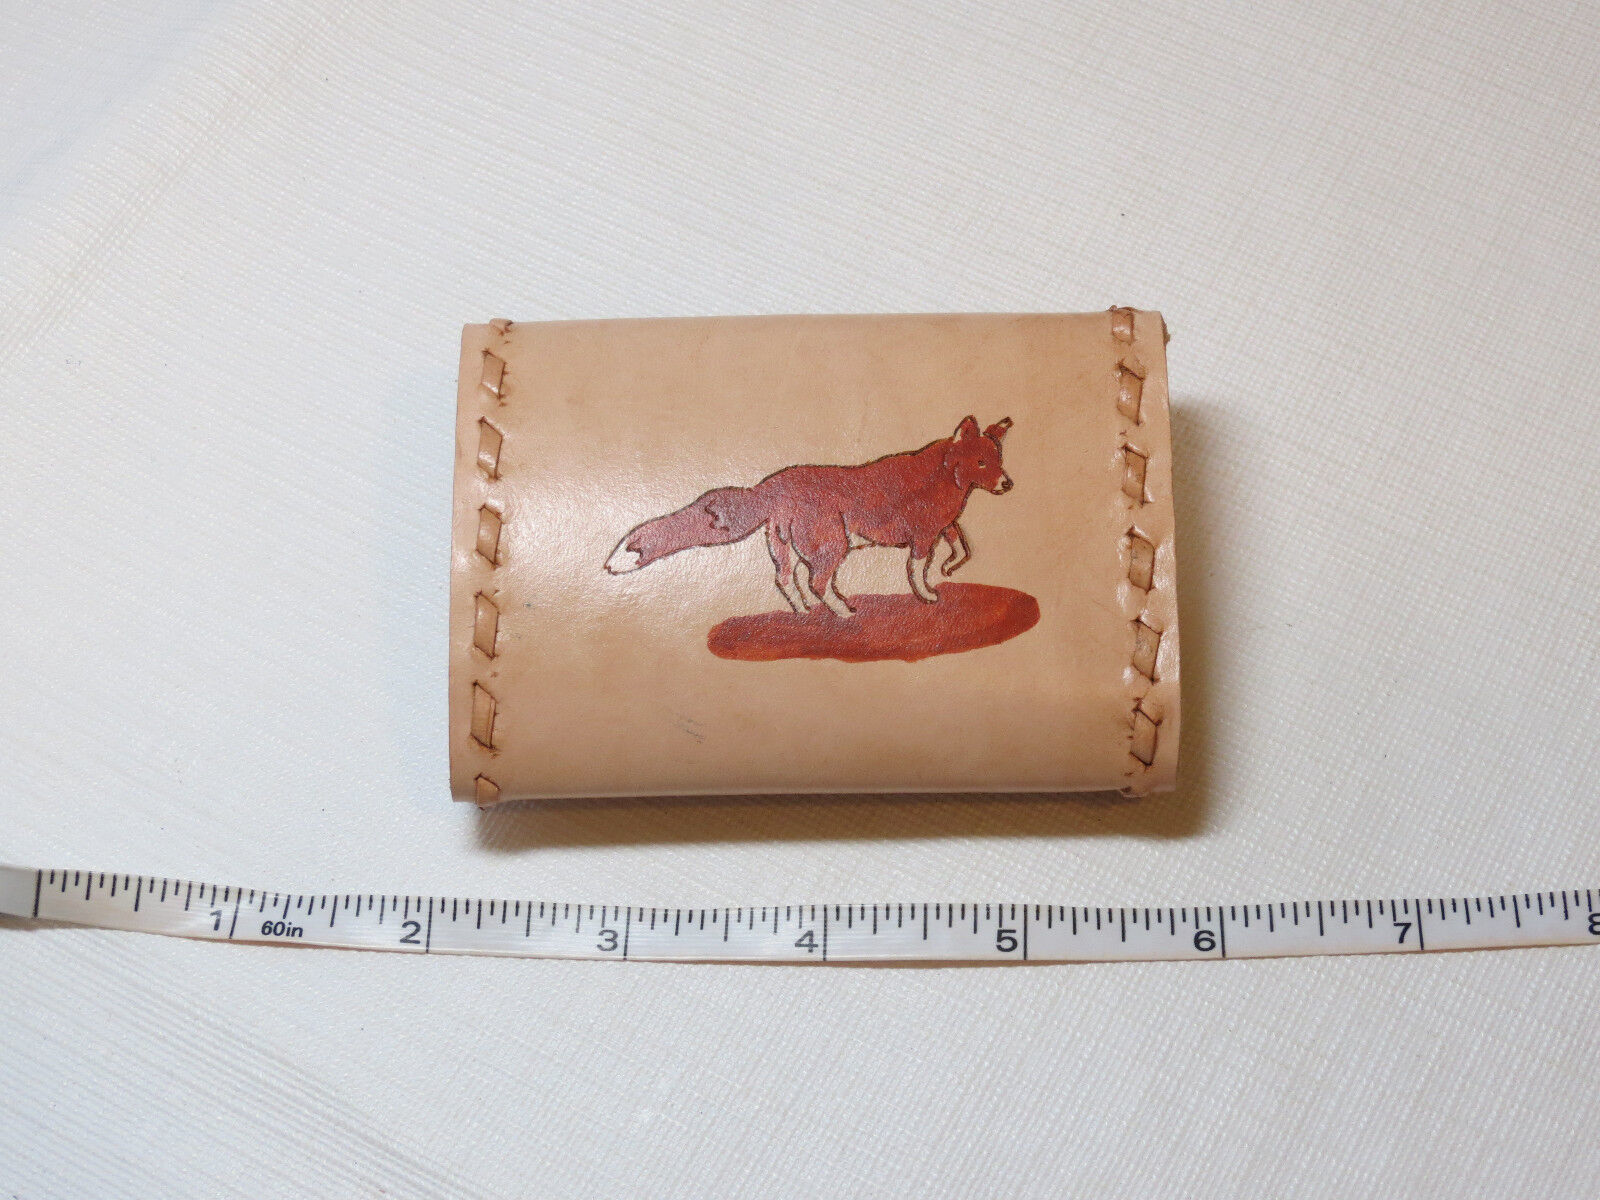 Primary image for Handmade leather key holder beigh w/ beigh stitching 3.5" X 2.5" Fox Wolf Dog